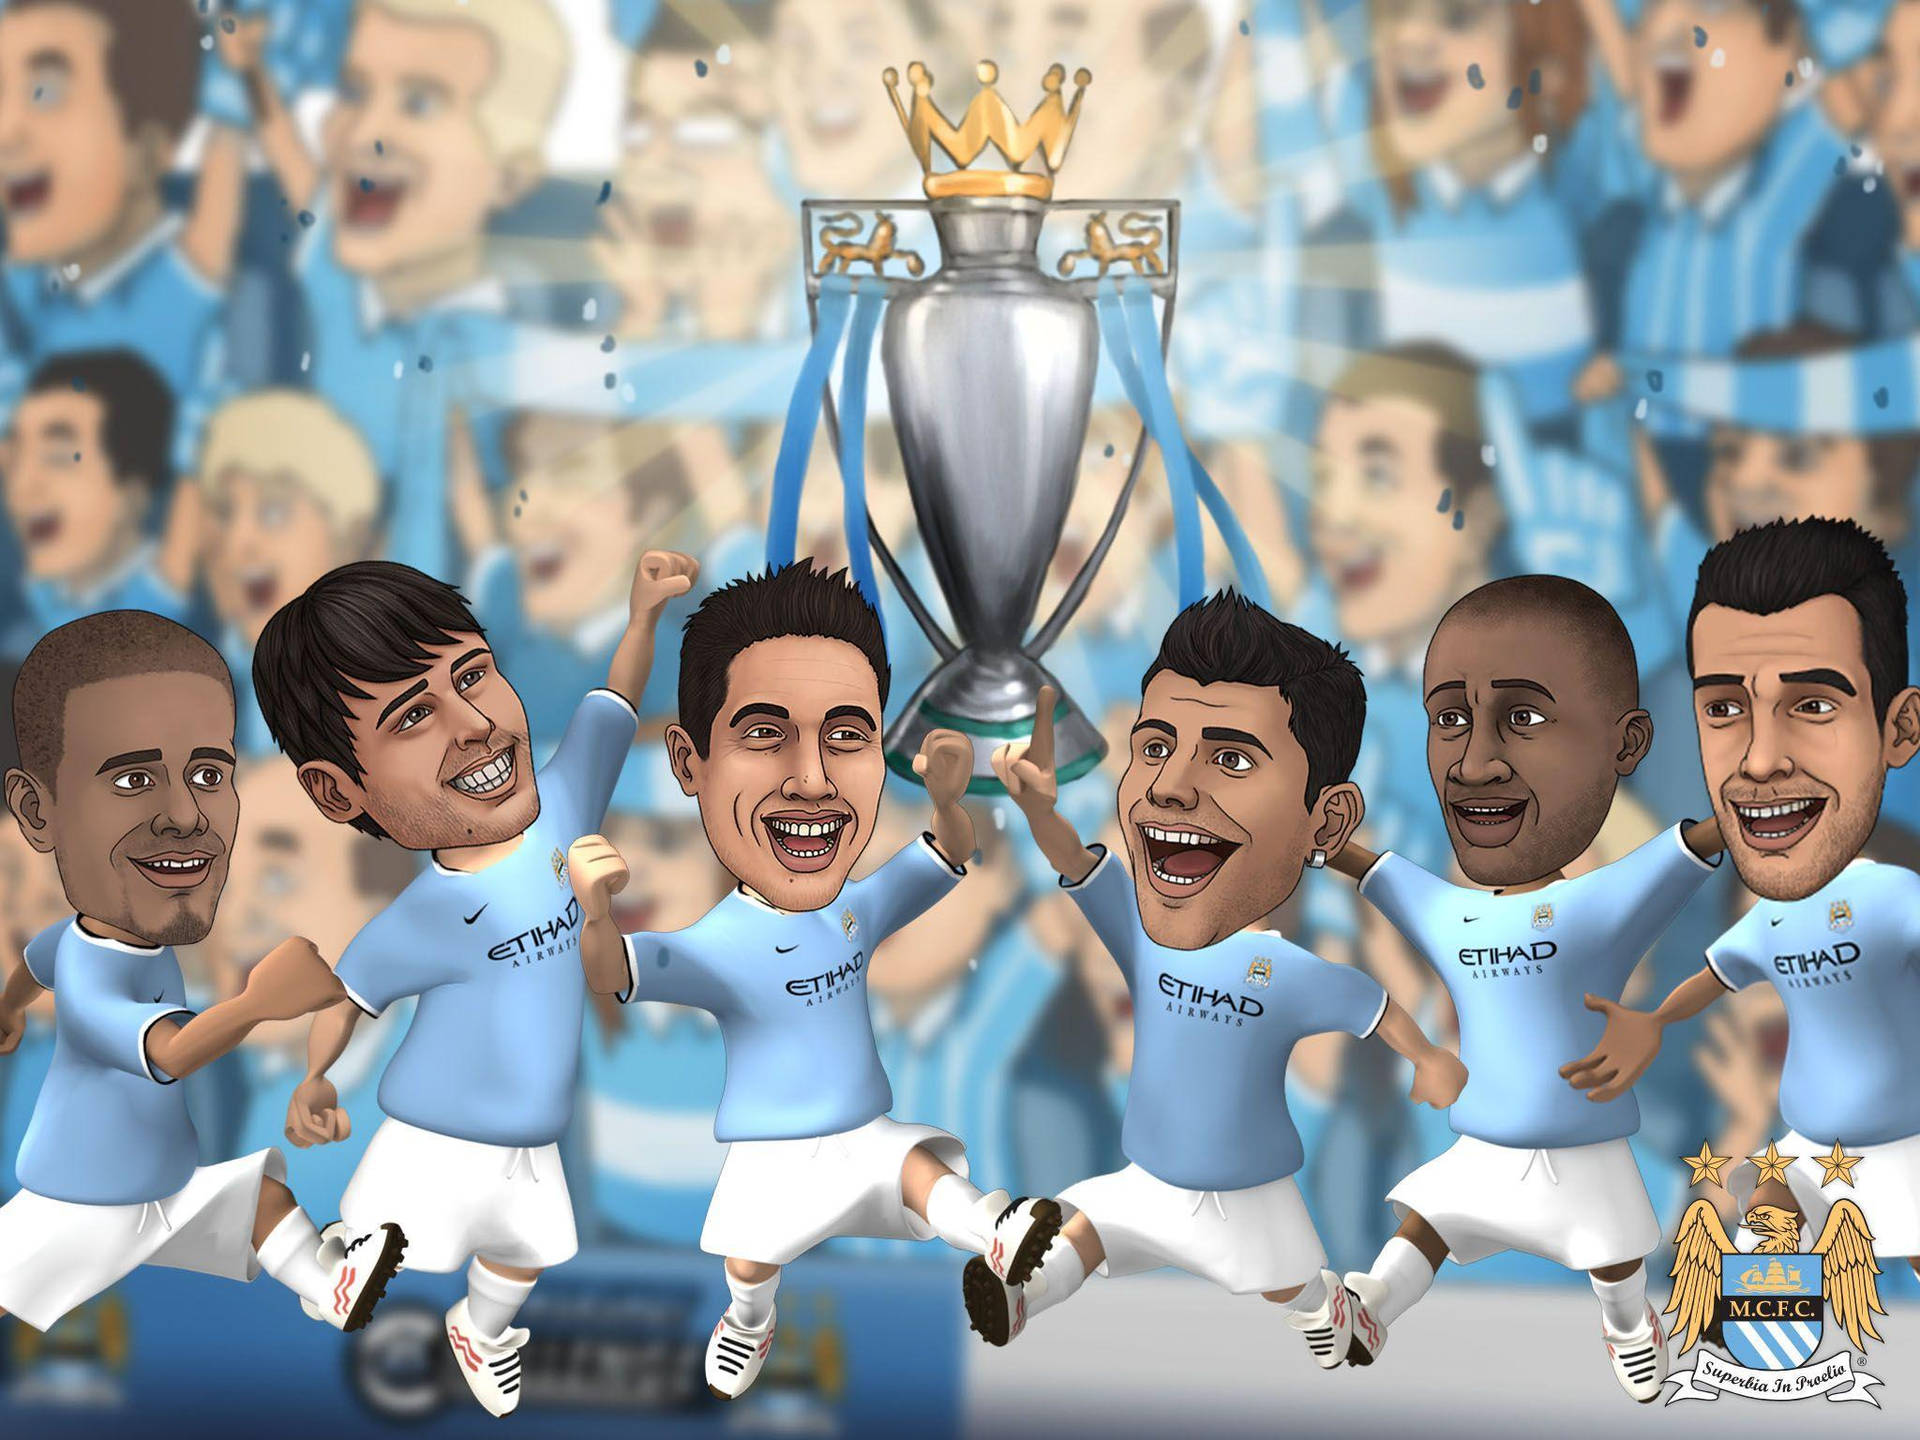 Funny And Cute Manchester City FC Caricatures Wallpaper